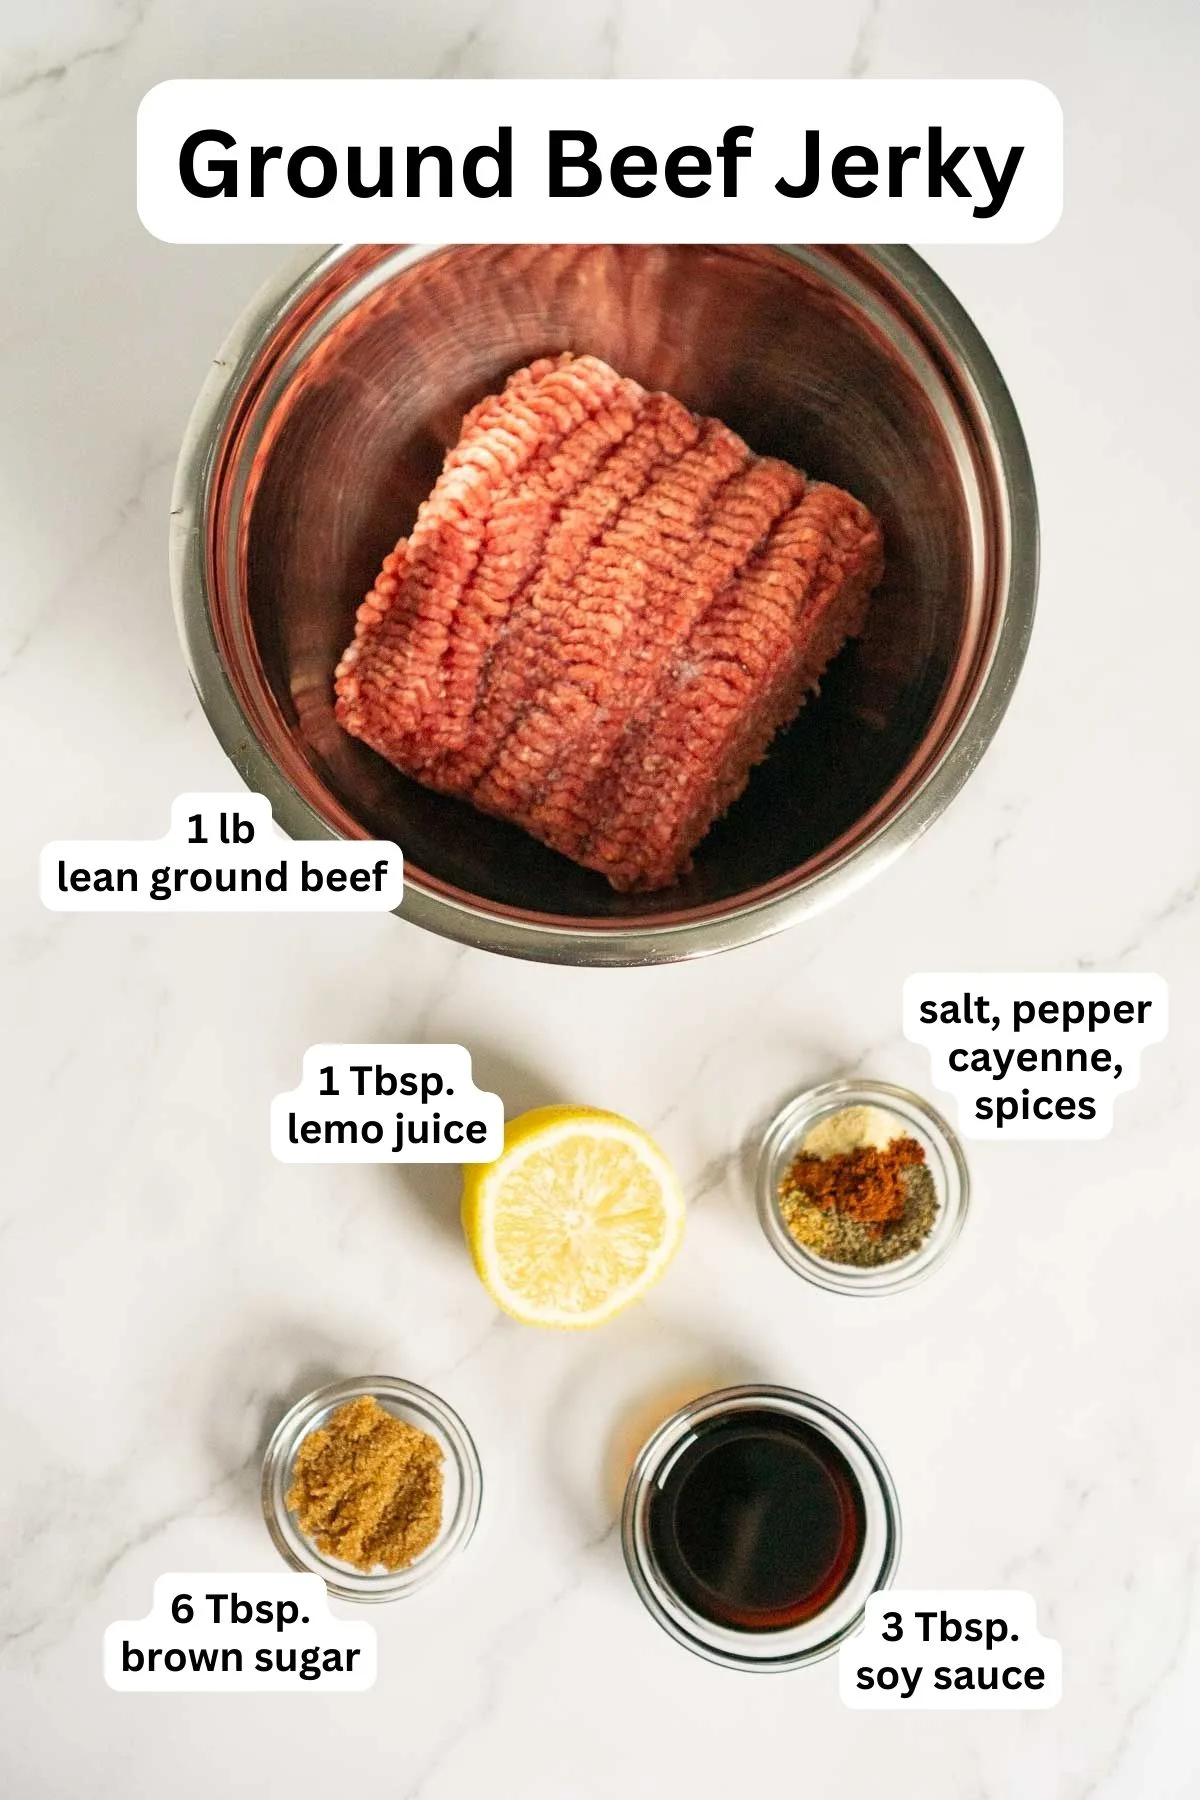 Ingredients to make jerky with ground beef